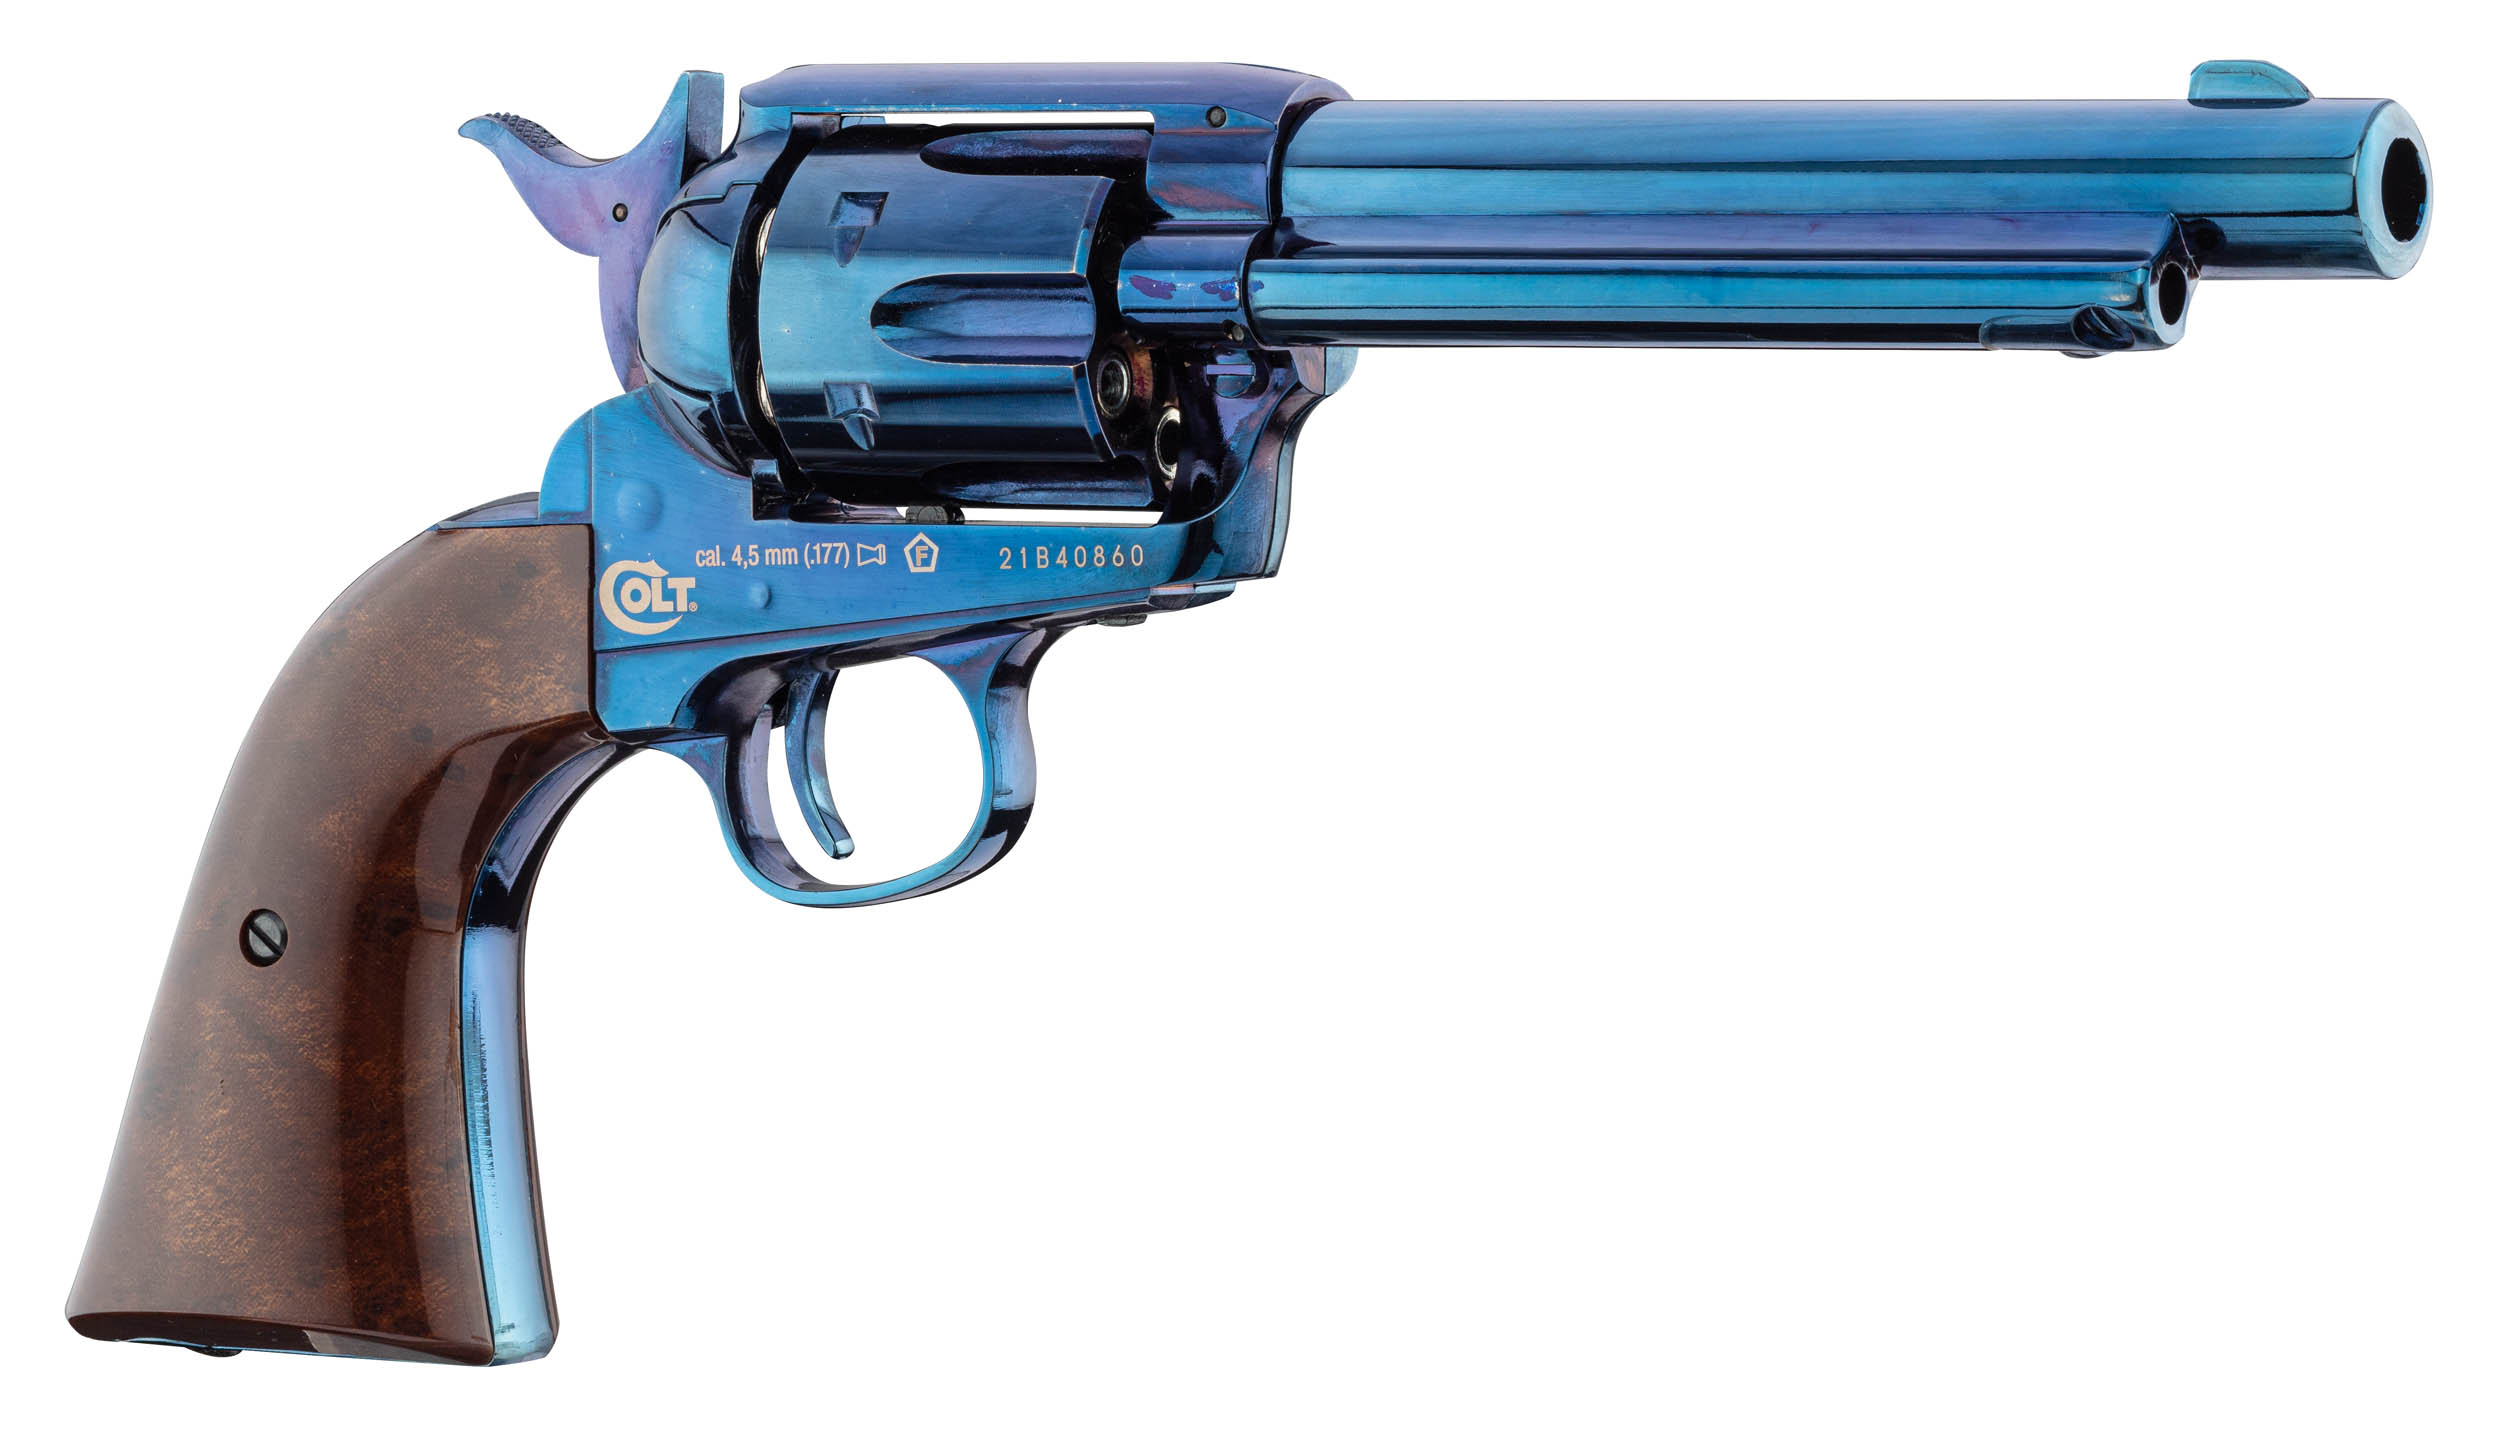 ACR246-02 Colt Simple Action Army 45 revolver blue with diabolos cal. 4.5 mm - ACR246